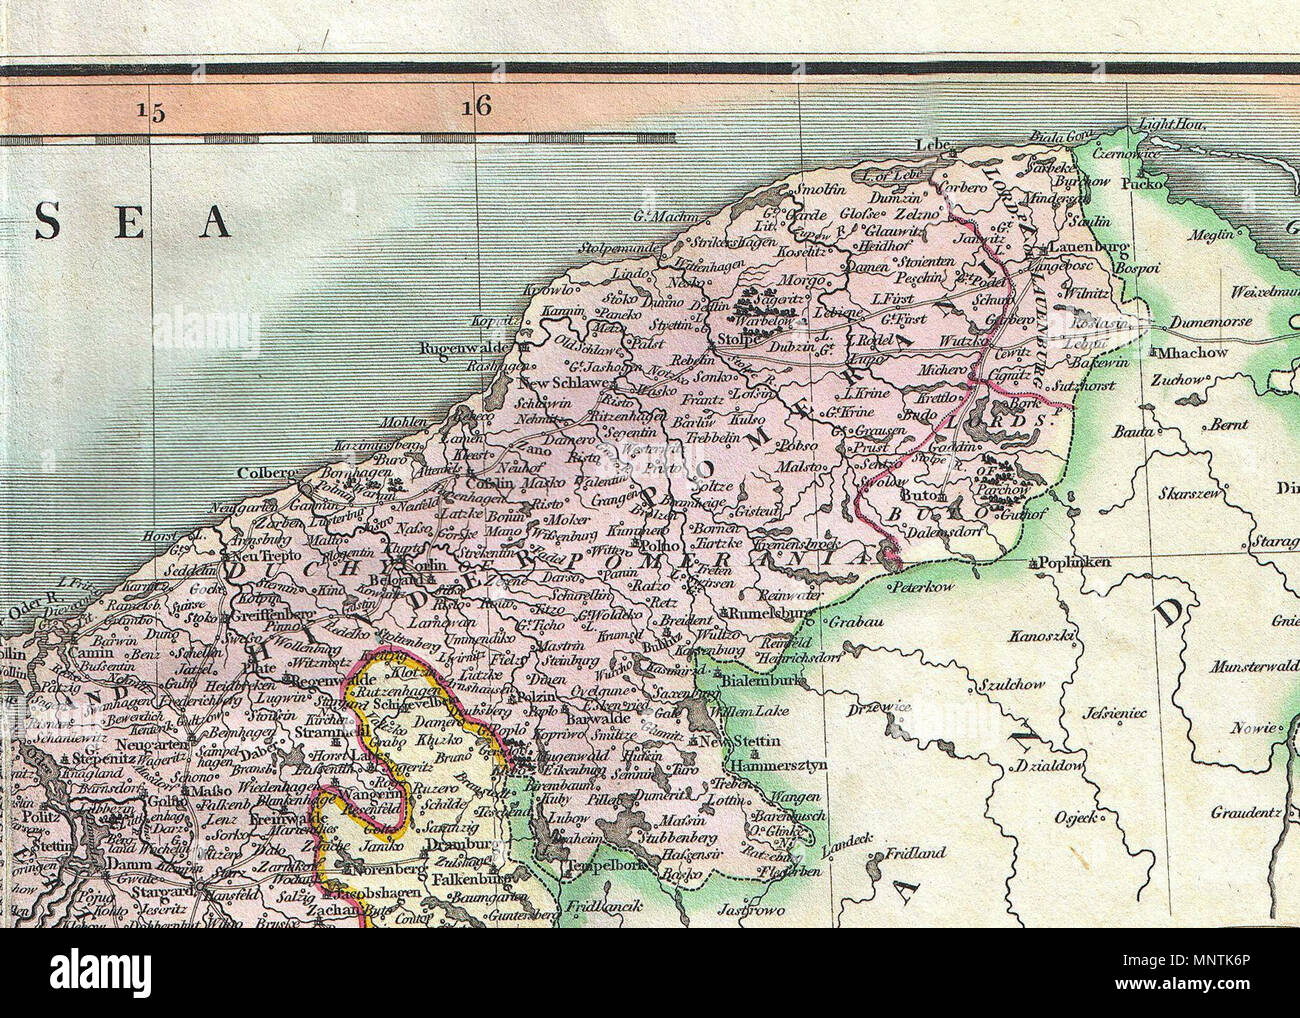 .  English: An attractive example of John Cary’s 1801 map of Upper Saxony, Germany. Covers from the Baltic Sea south to Franconia, Bavaria, Bohemia and Moravia. Extends eastward as far as Poland. Includes the Duchy of Silesia, the Duchy of Lusatia, Prussian Pomerania, Electoral Mark of Brandenburg, and the Margraviate of Meissen. Notes the cities of Berlin, Prague, Dresden, and Leipzig among many others. Highly detailed with color coding according to region. Shows forests, cities, palaces, forts, roads and rivers. All in all, one of the most interesting and attractive atlas maps of Upper Saxon Stock Photo